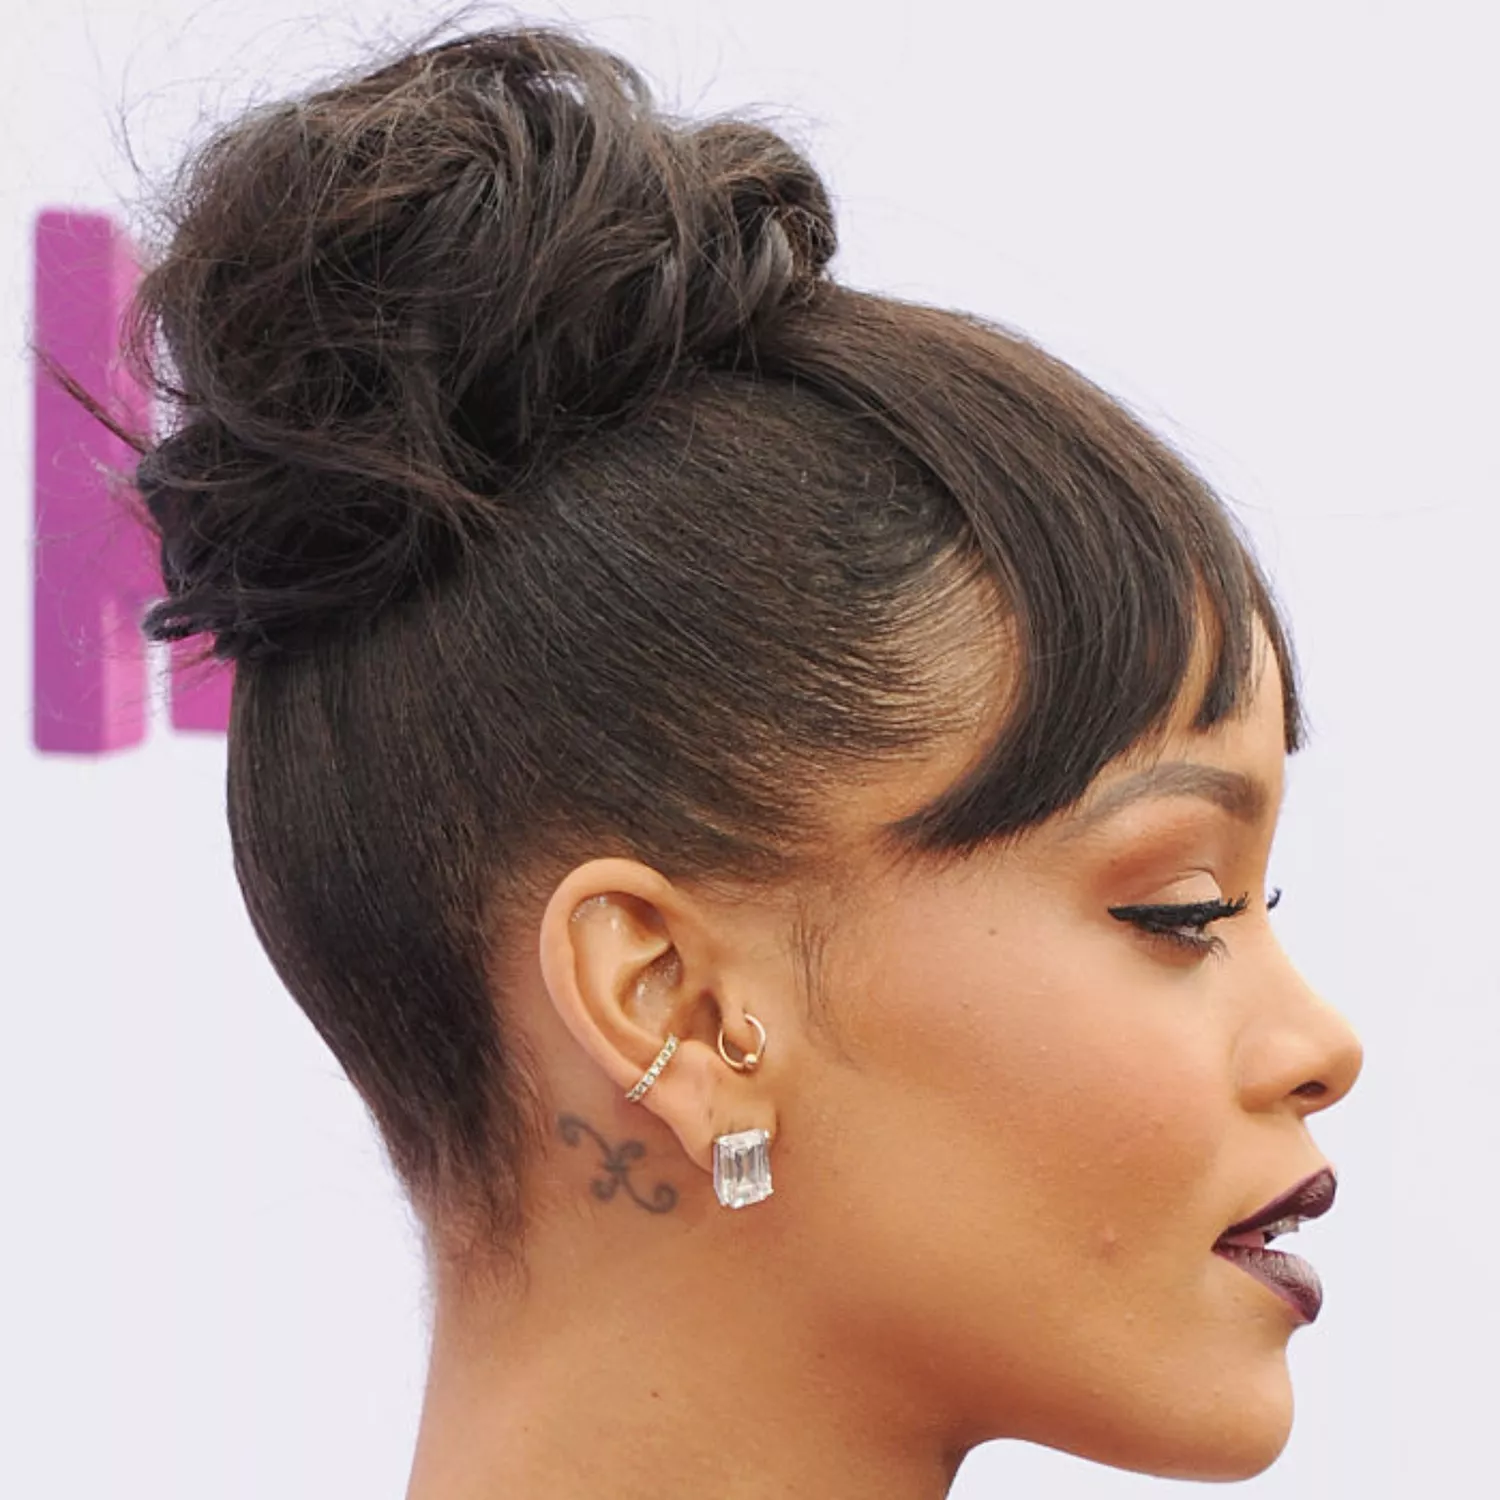 zoomed-in photo of Rihanna with Pisces astrological sign tattoo behind the ear